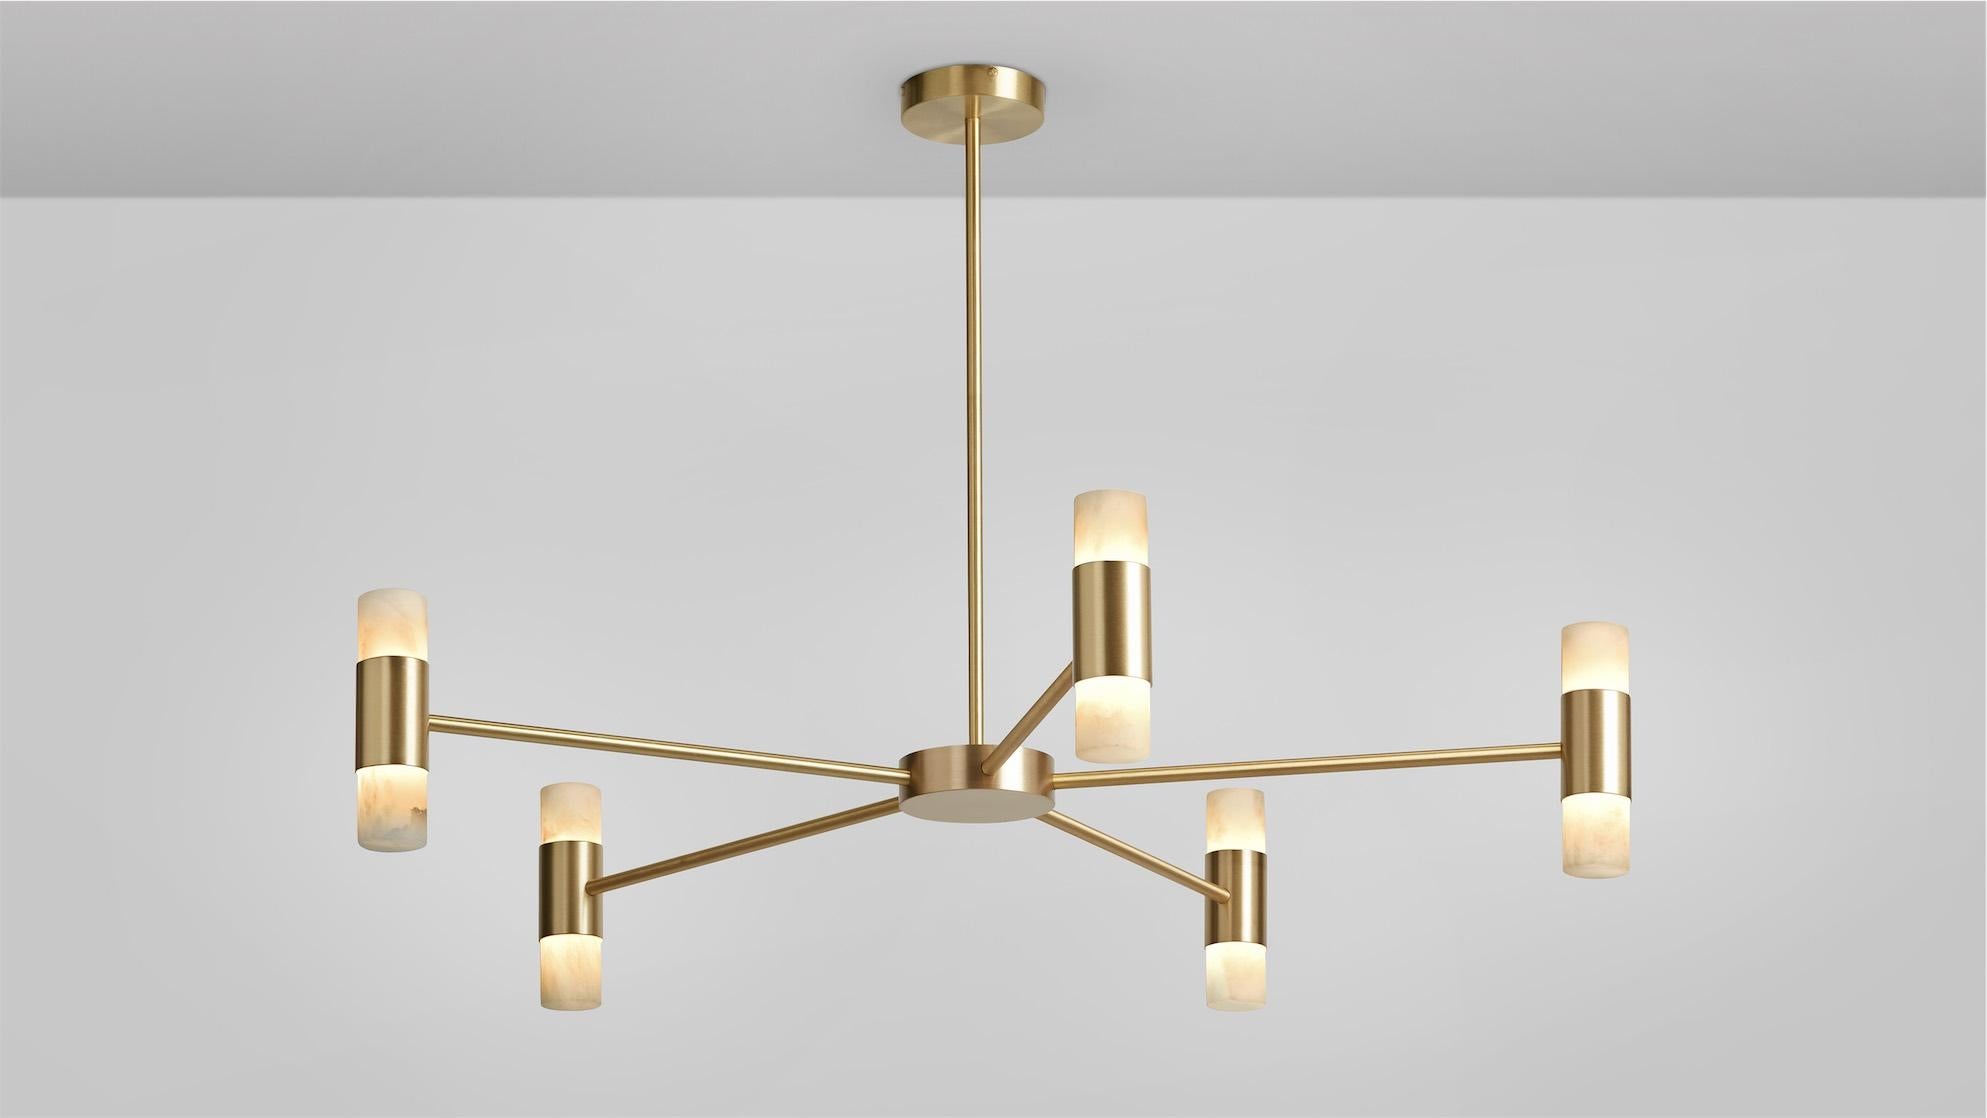 Roma pendant by CTO Lighting
Materials: satin brass, alabaster.
Dimensions: H 29 x D 101 cm
Available in satin brass and bronze.

Celebrating the simplicity of line and form, The Roma collection is designed to highlight the noble quality of